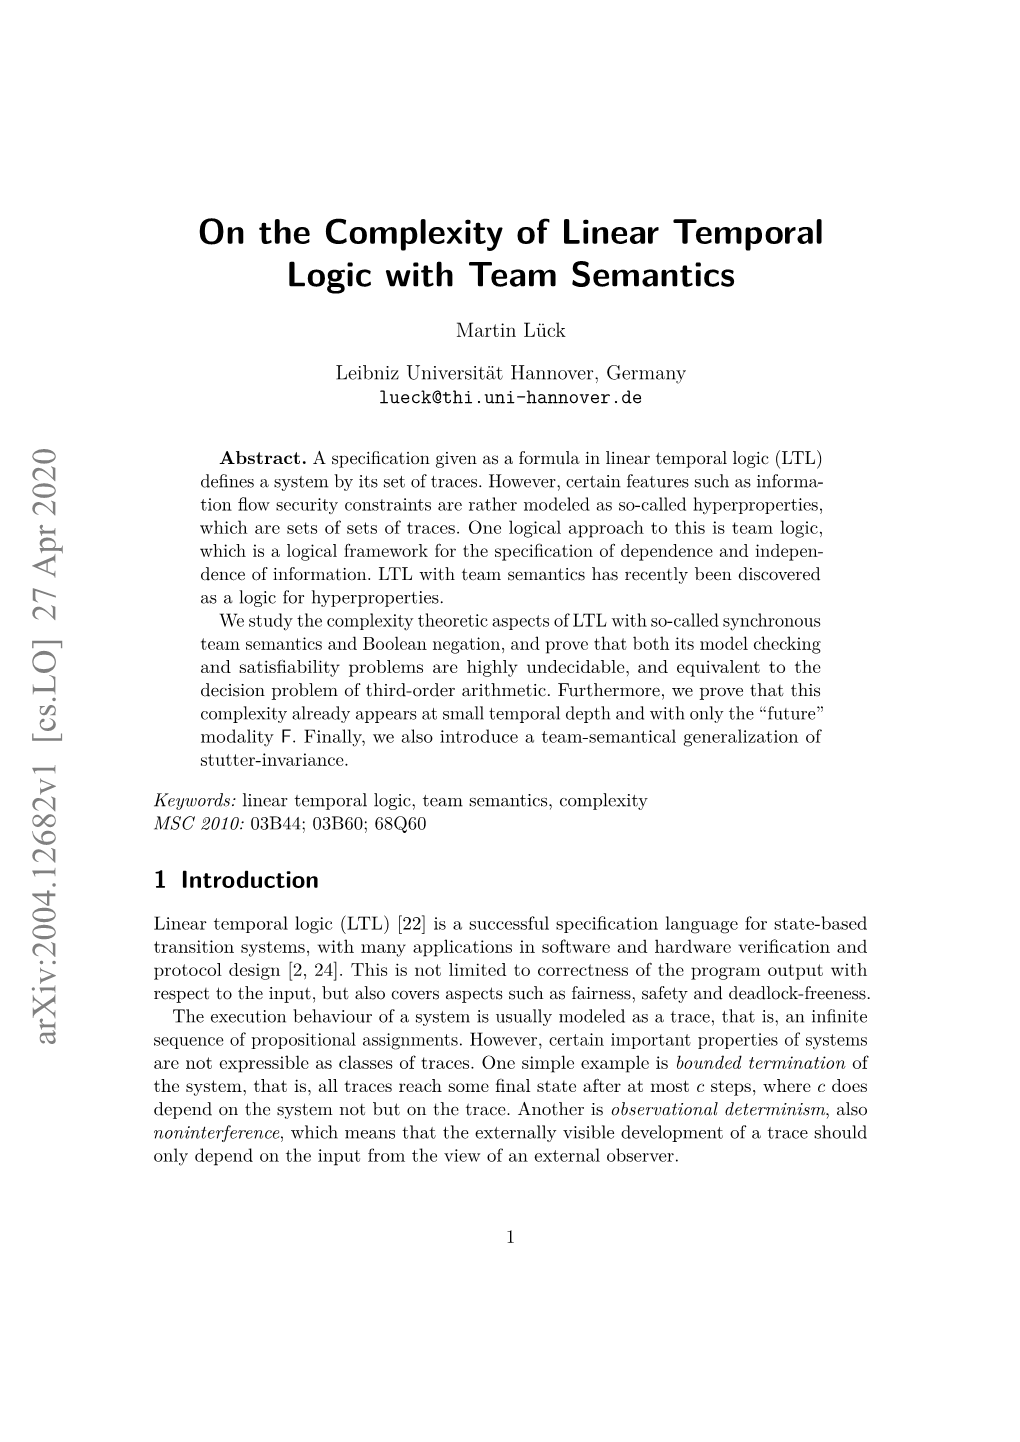 On the Complexity of Linear Temporal Logic with Team Semantics Arxiv